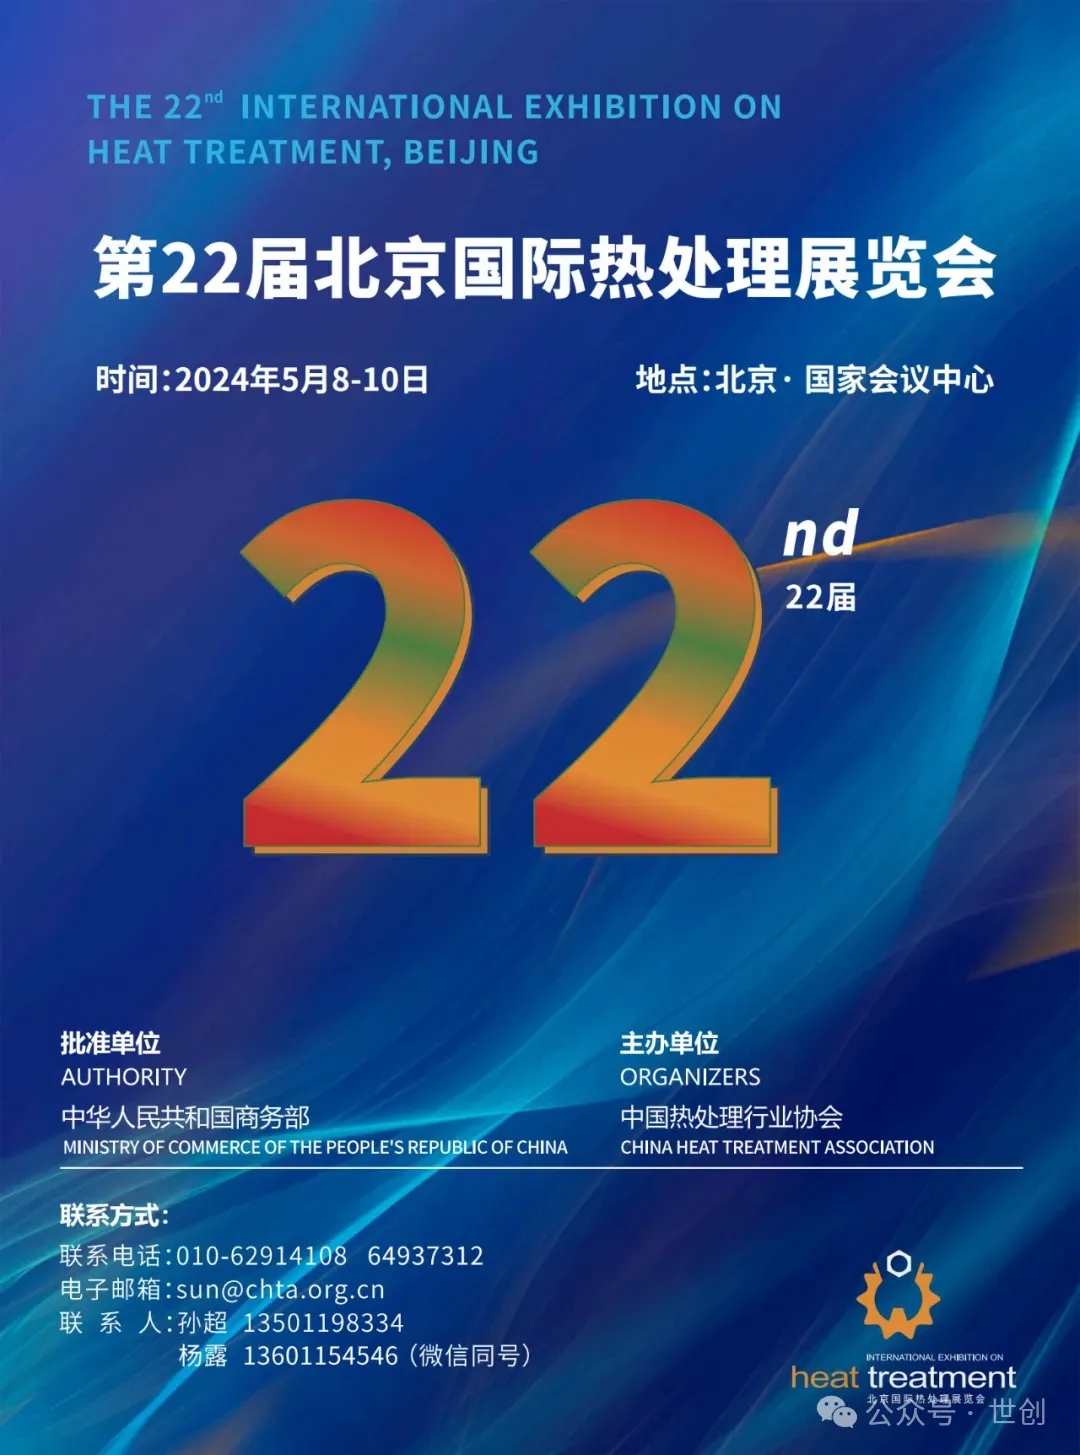 The 22nd Beijing International Heat Treatment Exhibition is imminent, and Strong Technology is poised to launch